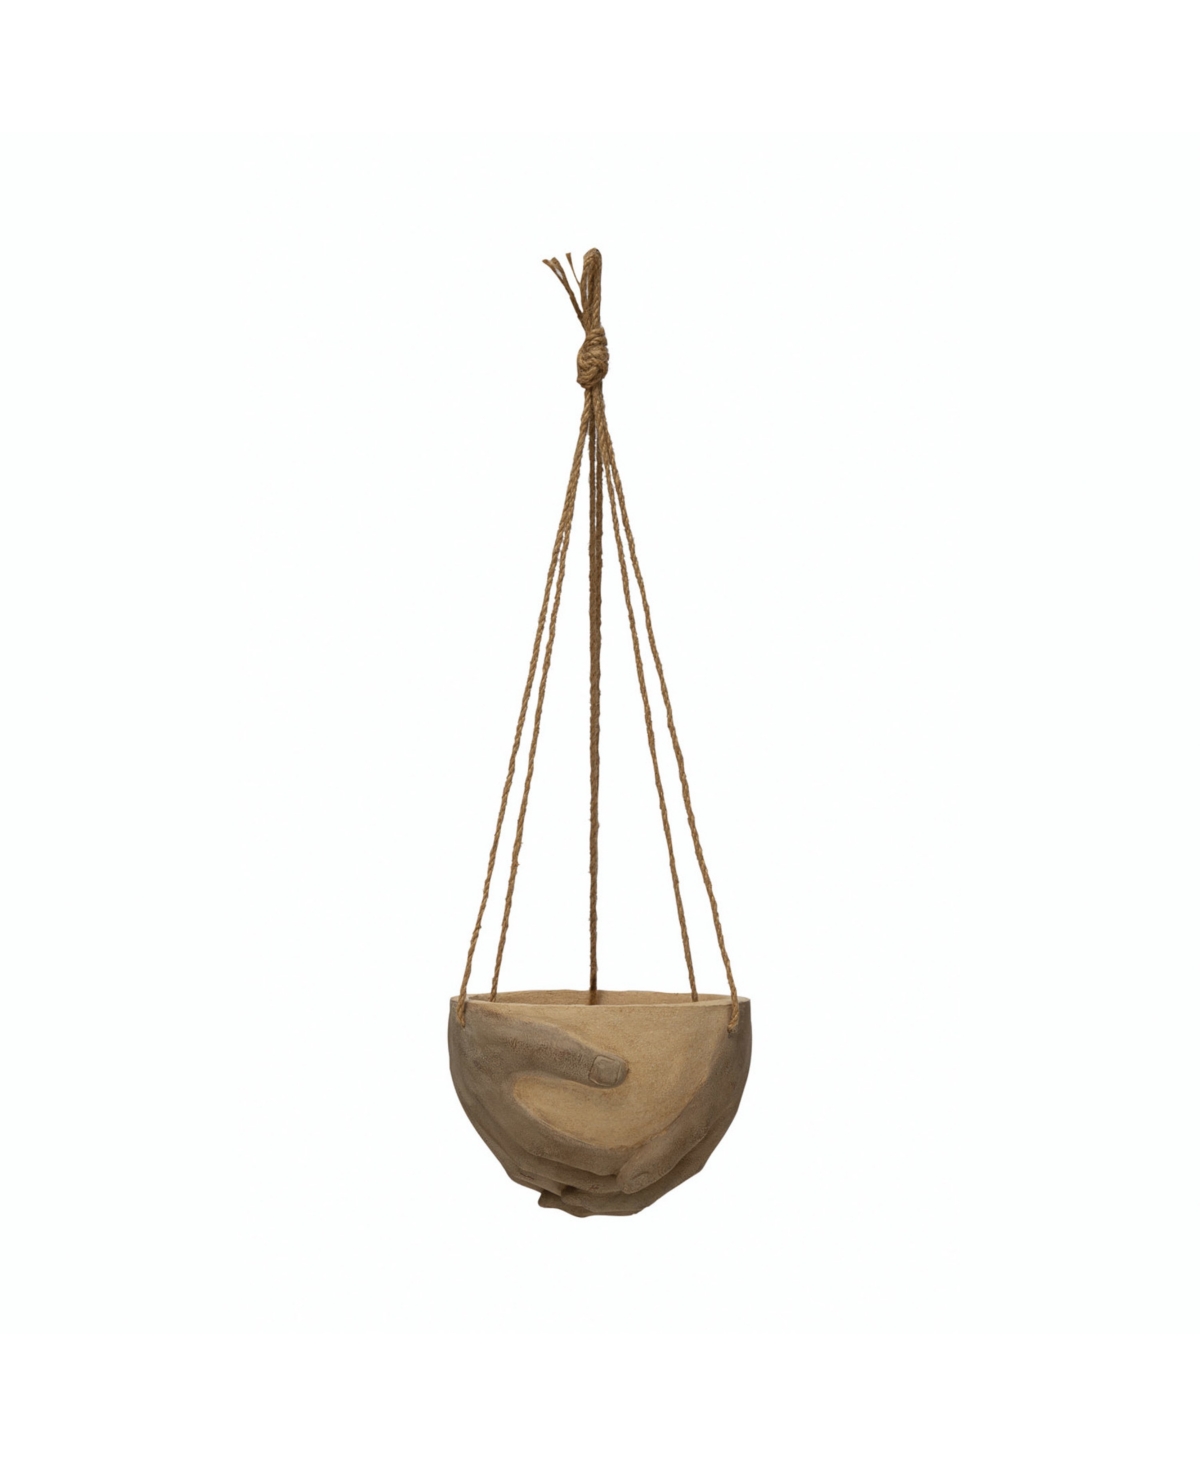 Hanging Resin and Cement Planter with Hands and Jute Hanger - Terracotta